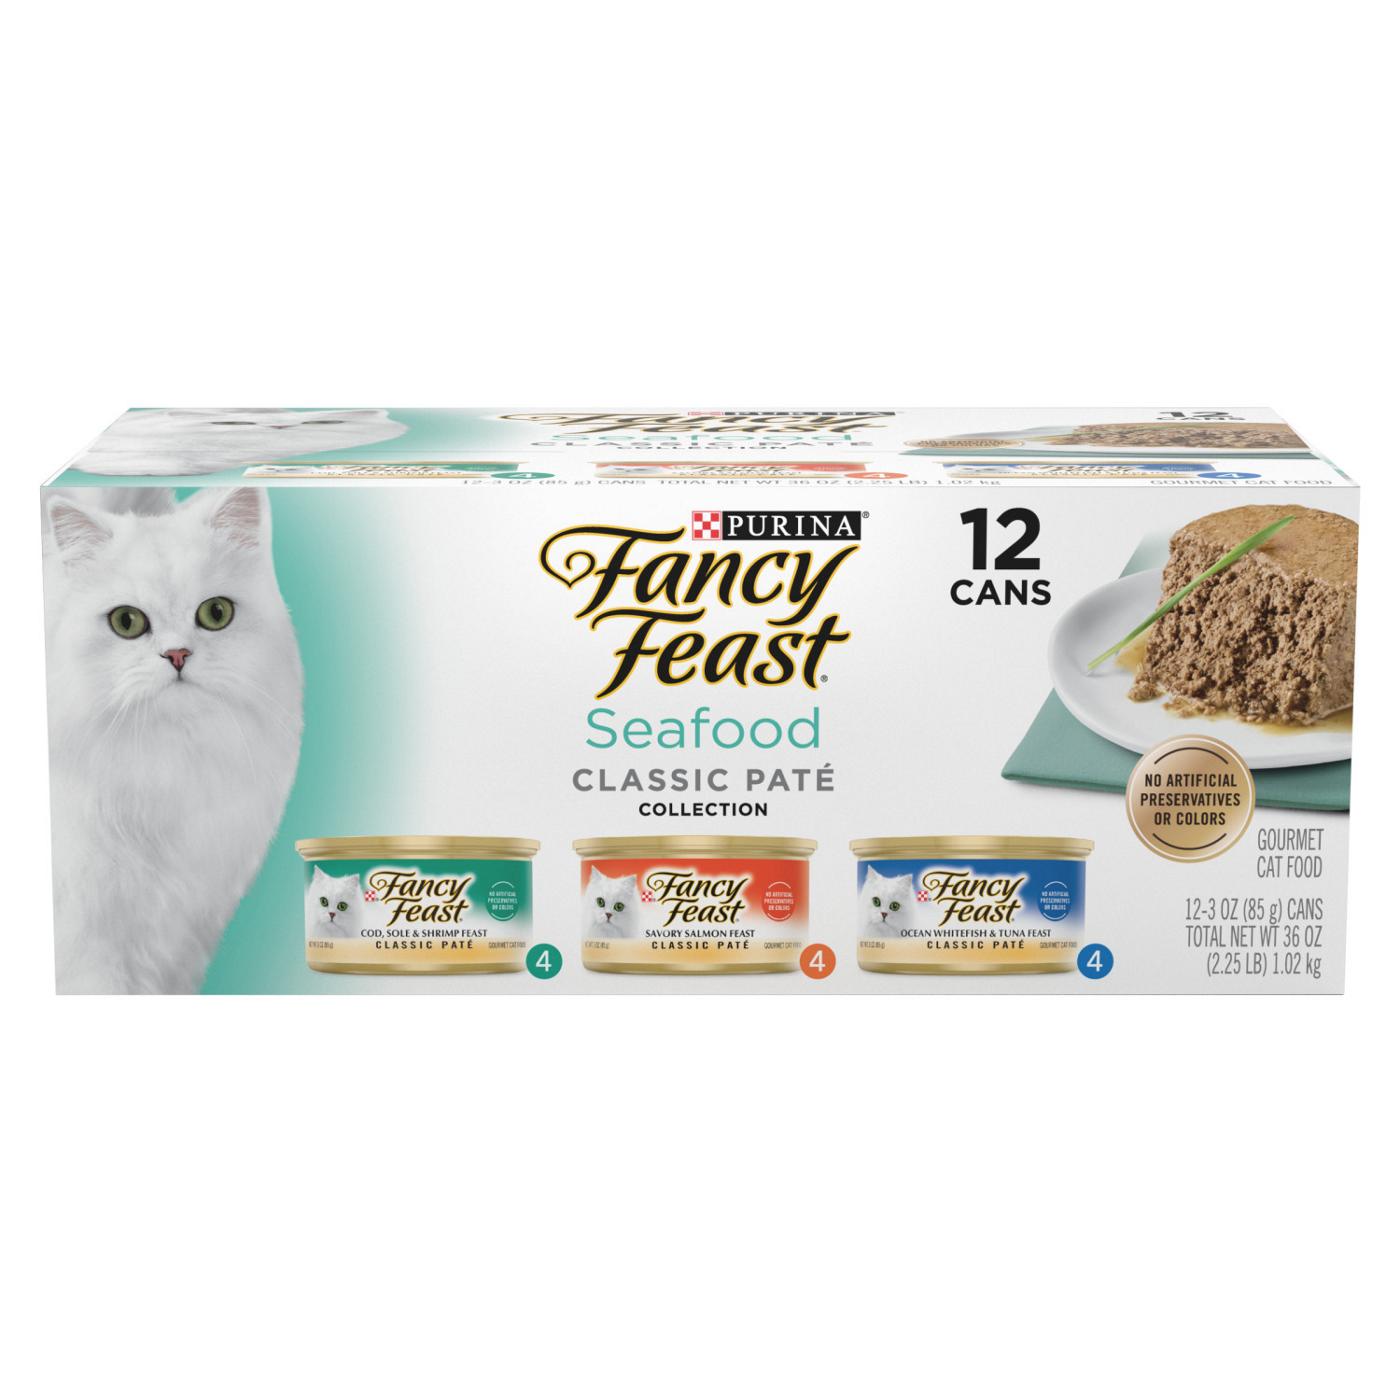 Fancy Feast Purina Fancy Feast Seafood Classic Pate Collection Grain Free Wet Cat Food Variety Pack; image 1 of 3